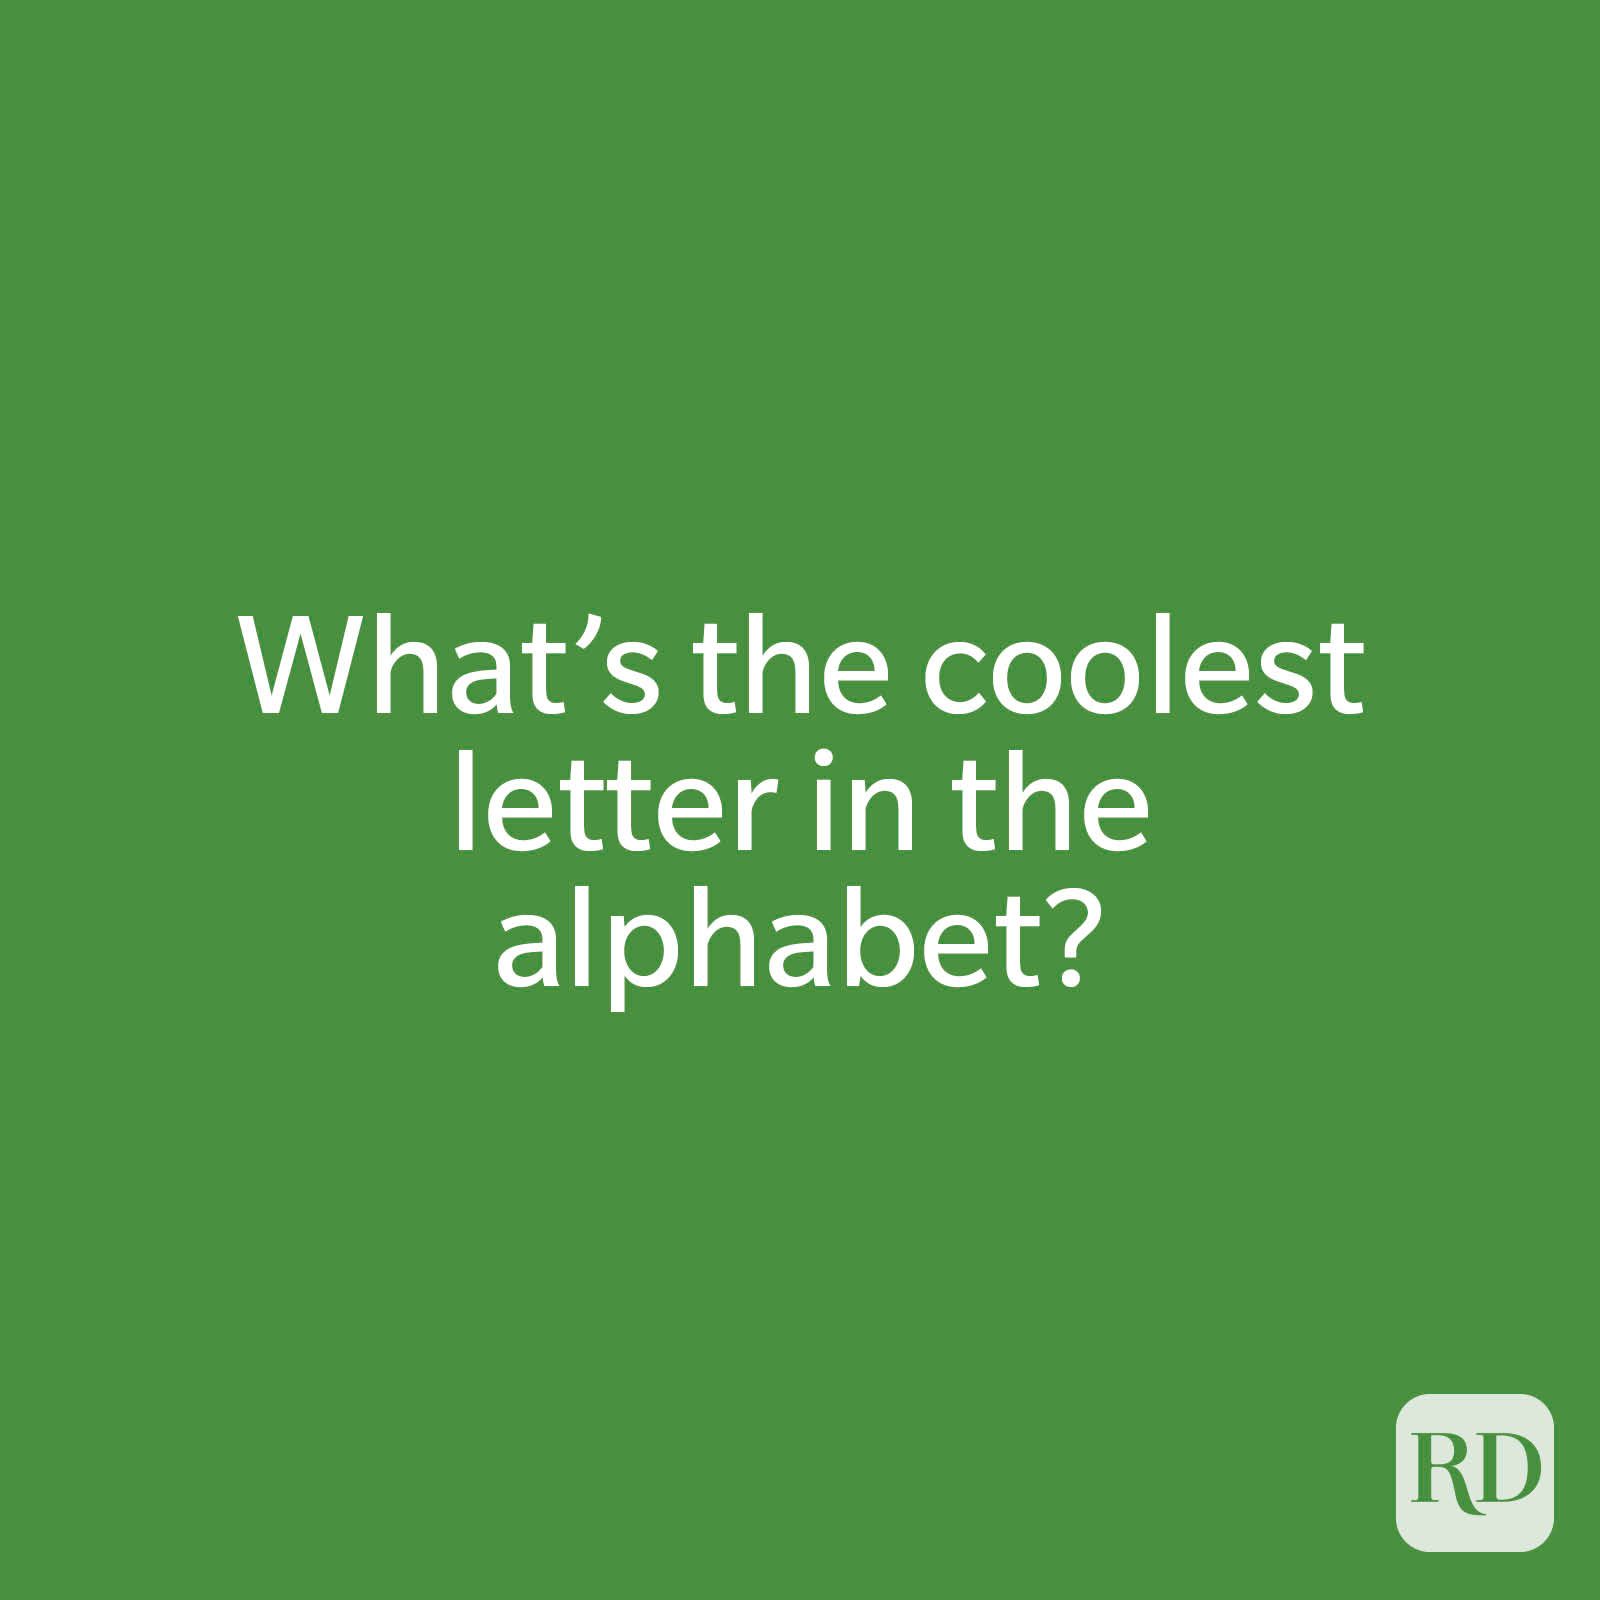 What’s the coolest letter in the alphabet?